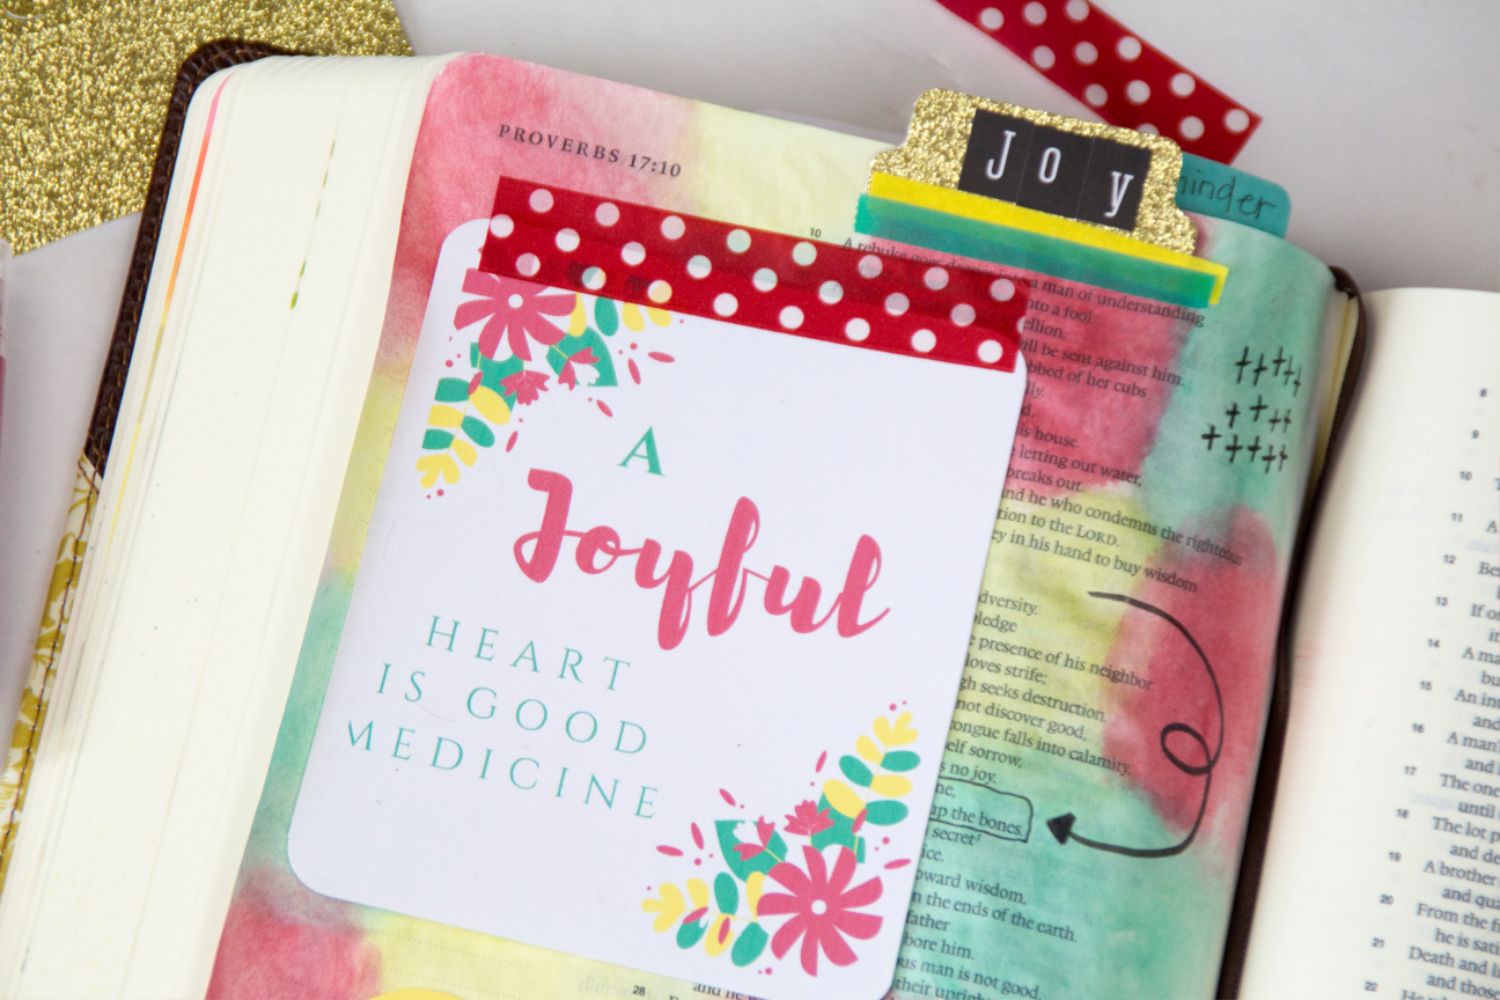 Free Printable for Bible Journaling Entry